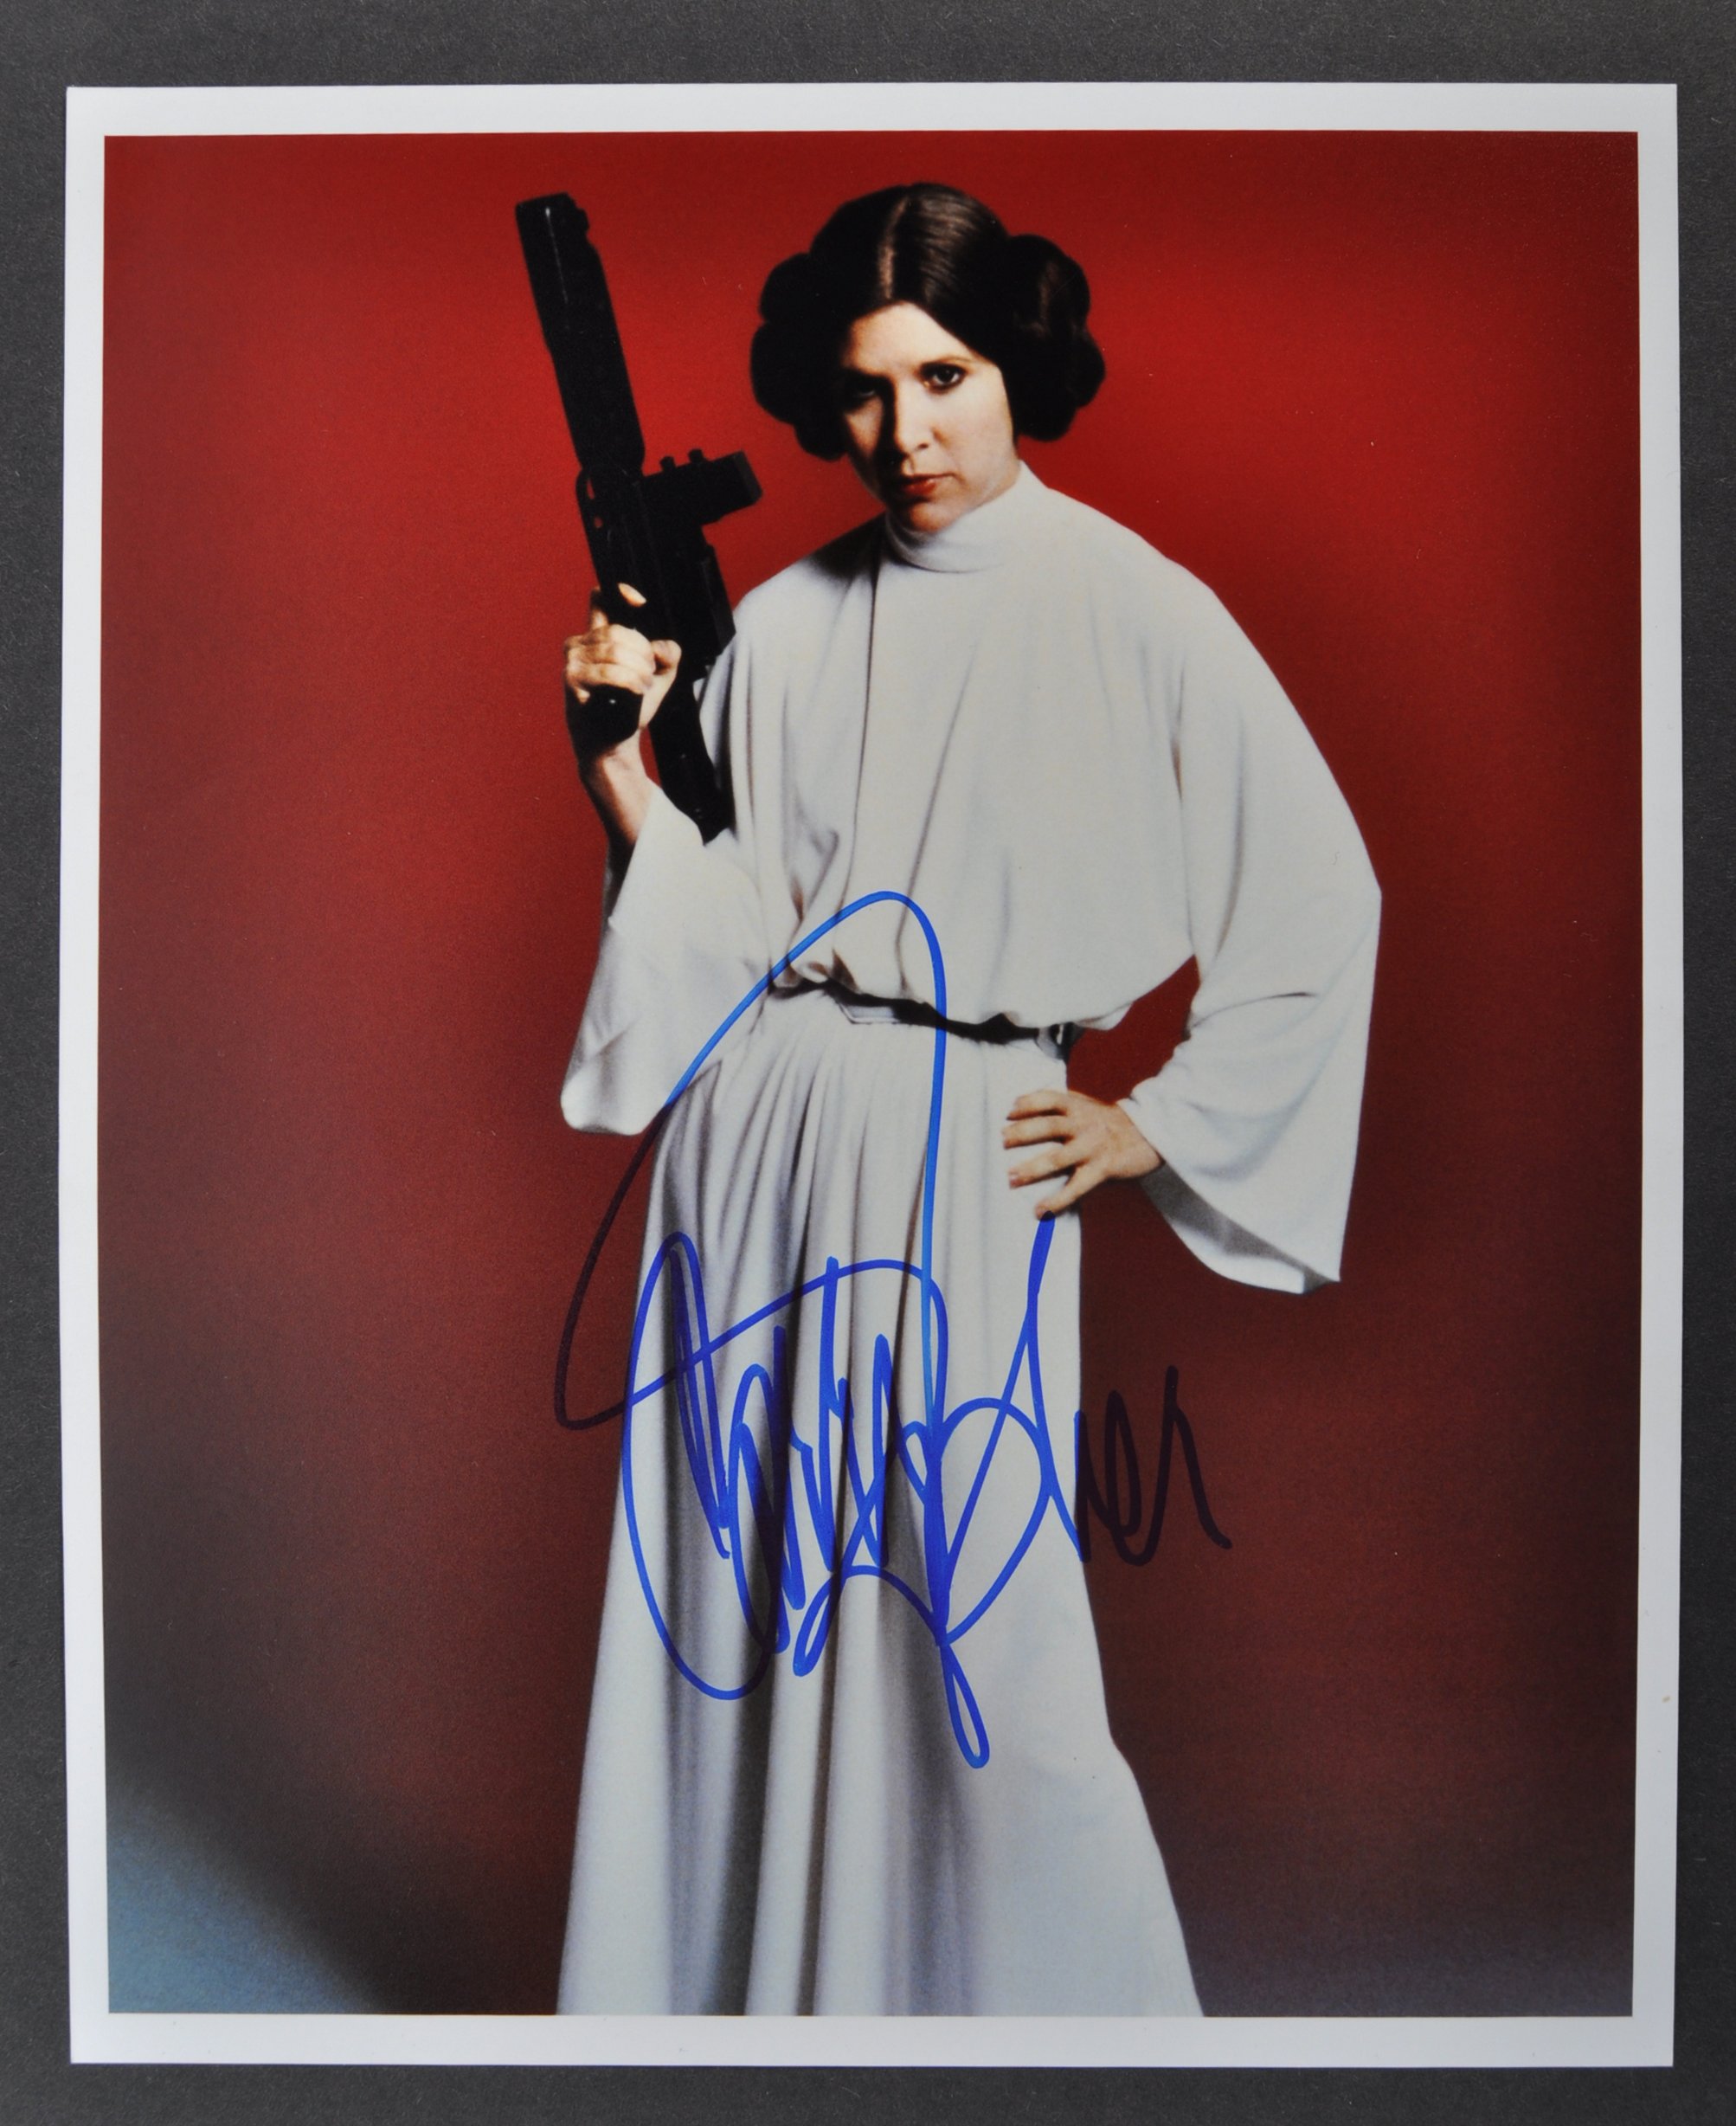 CARRIE FISHER - STAR WARS - INCREDIBLE AUTOGRAPHED 8X10" PHOTO